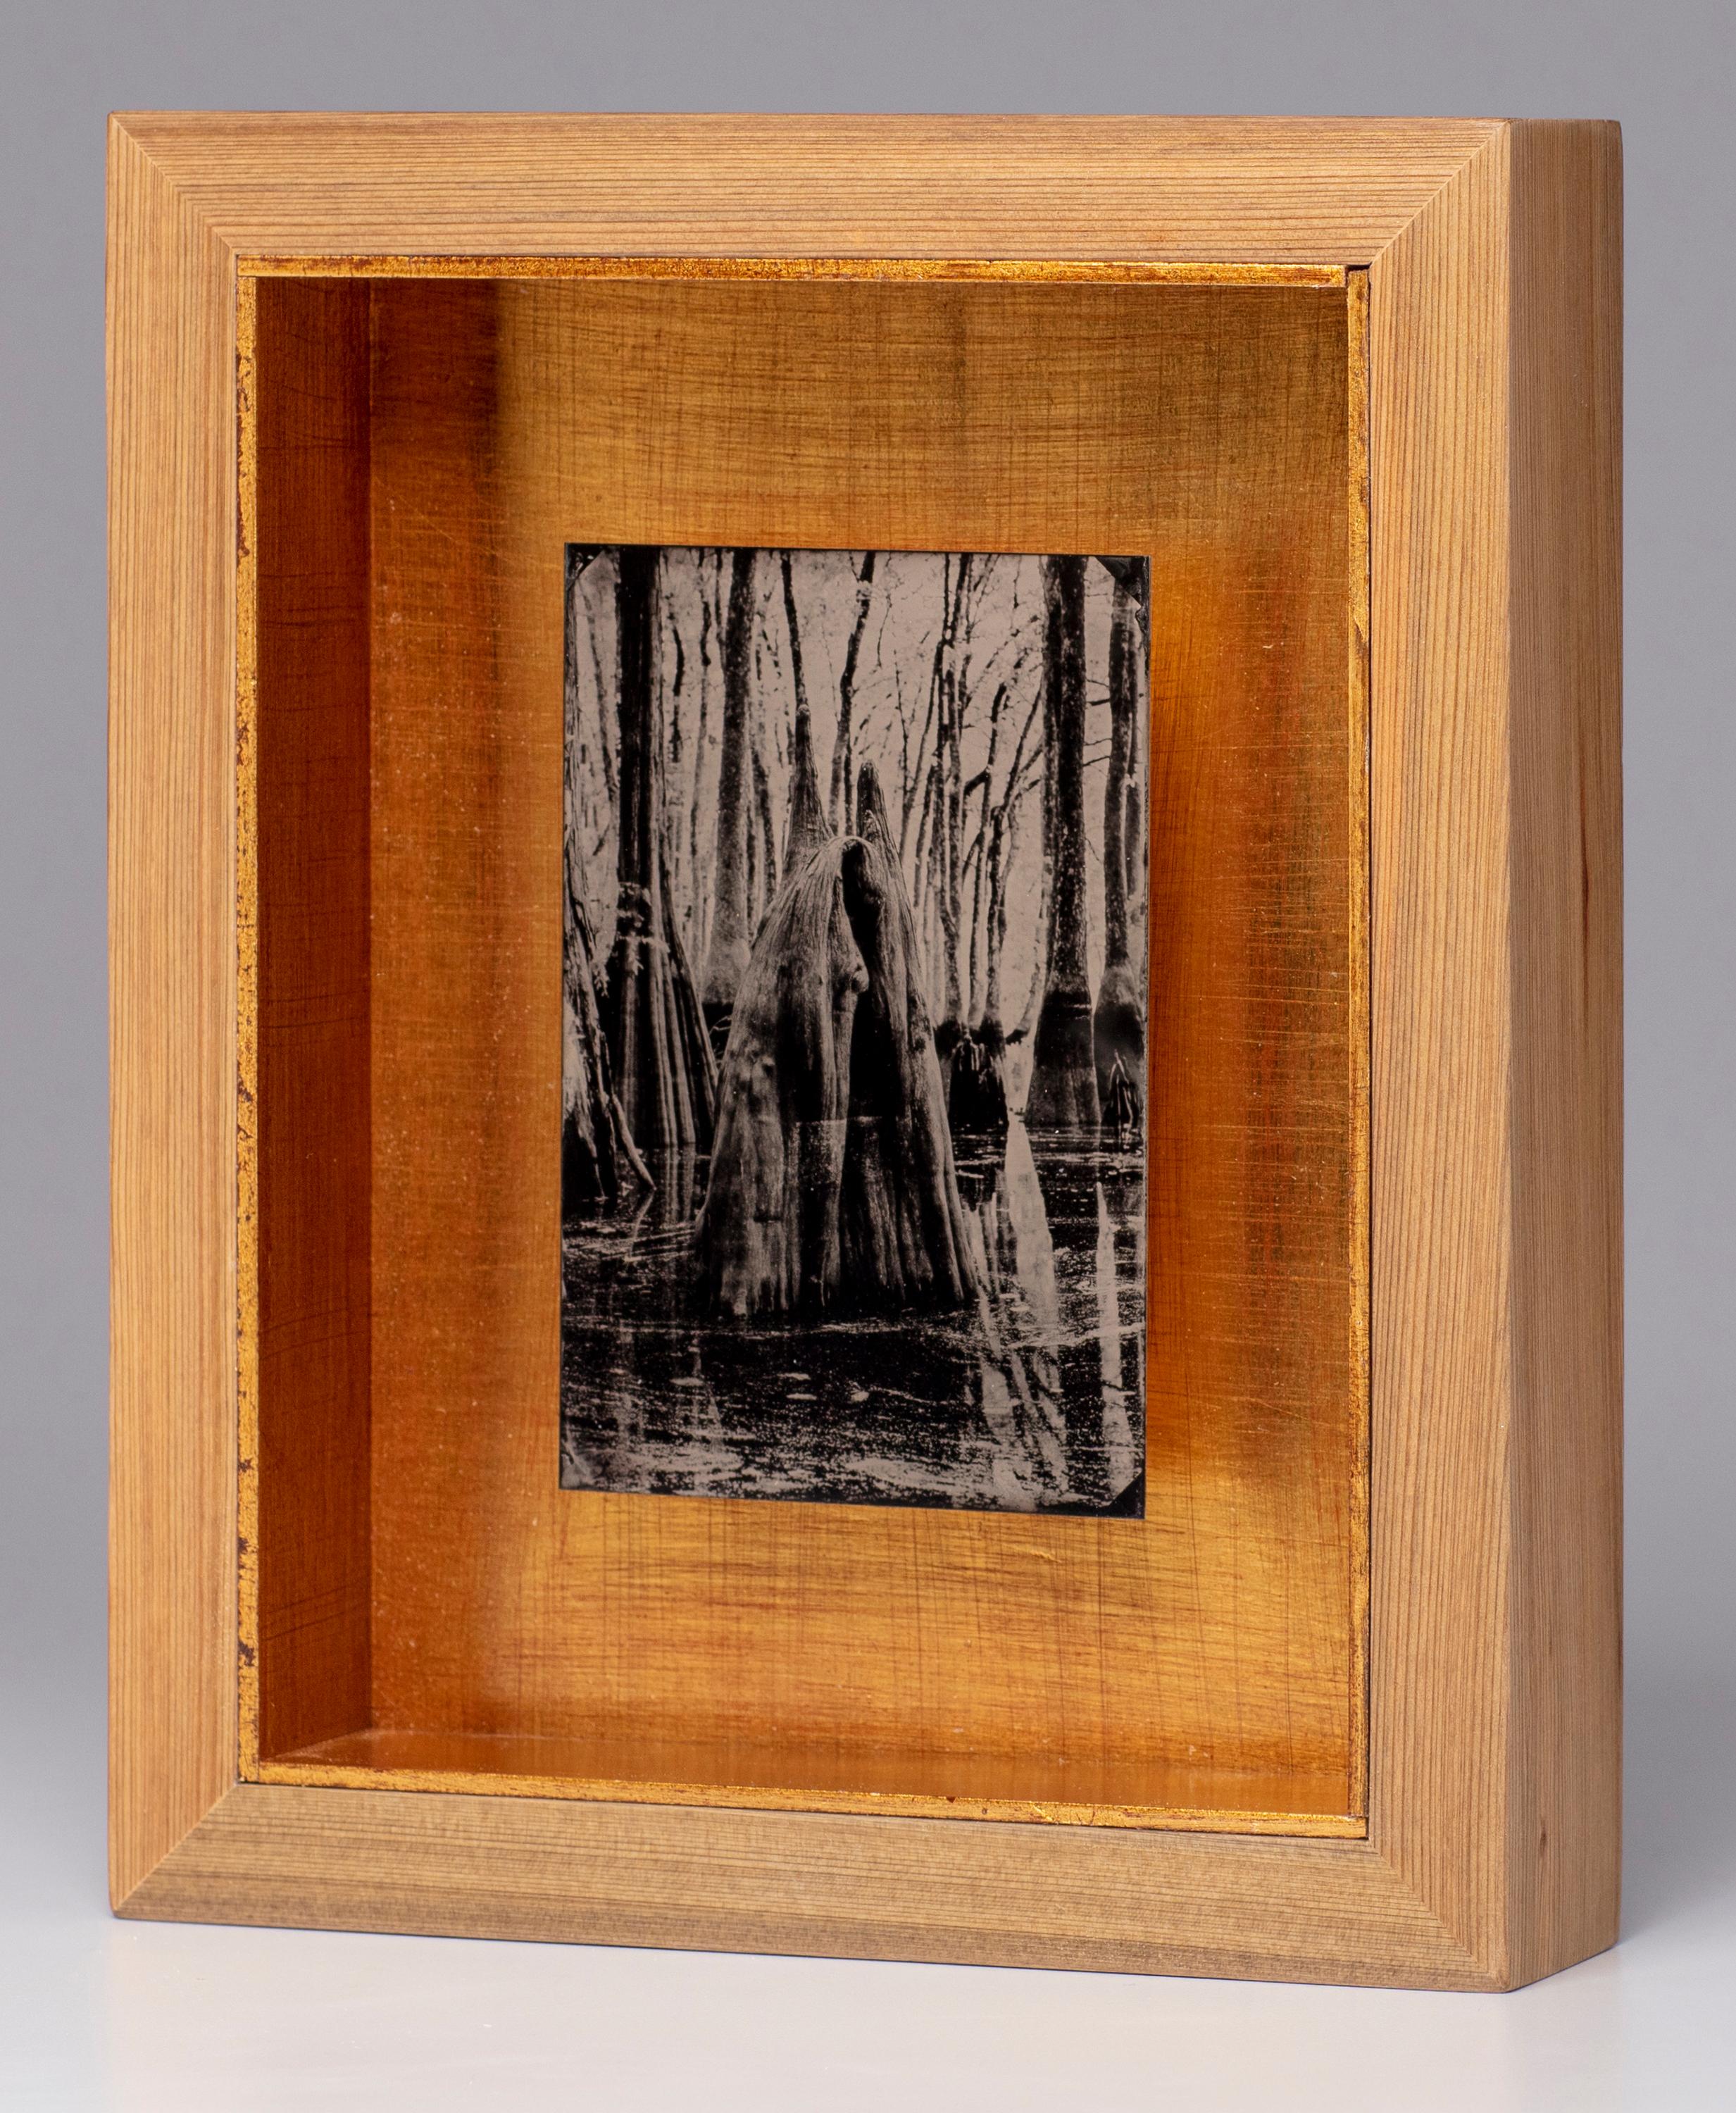 Shrouded - wet plate collodion - landscape photography - swamp - water - Photograph by Cecilia Montalvo & Charlie McCullers